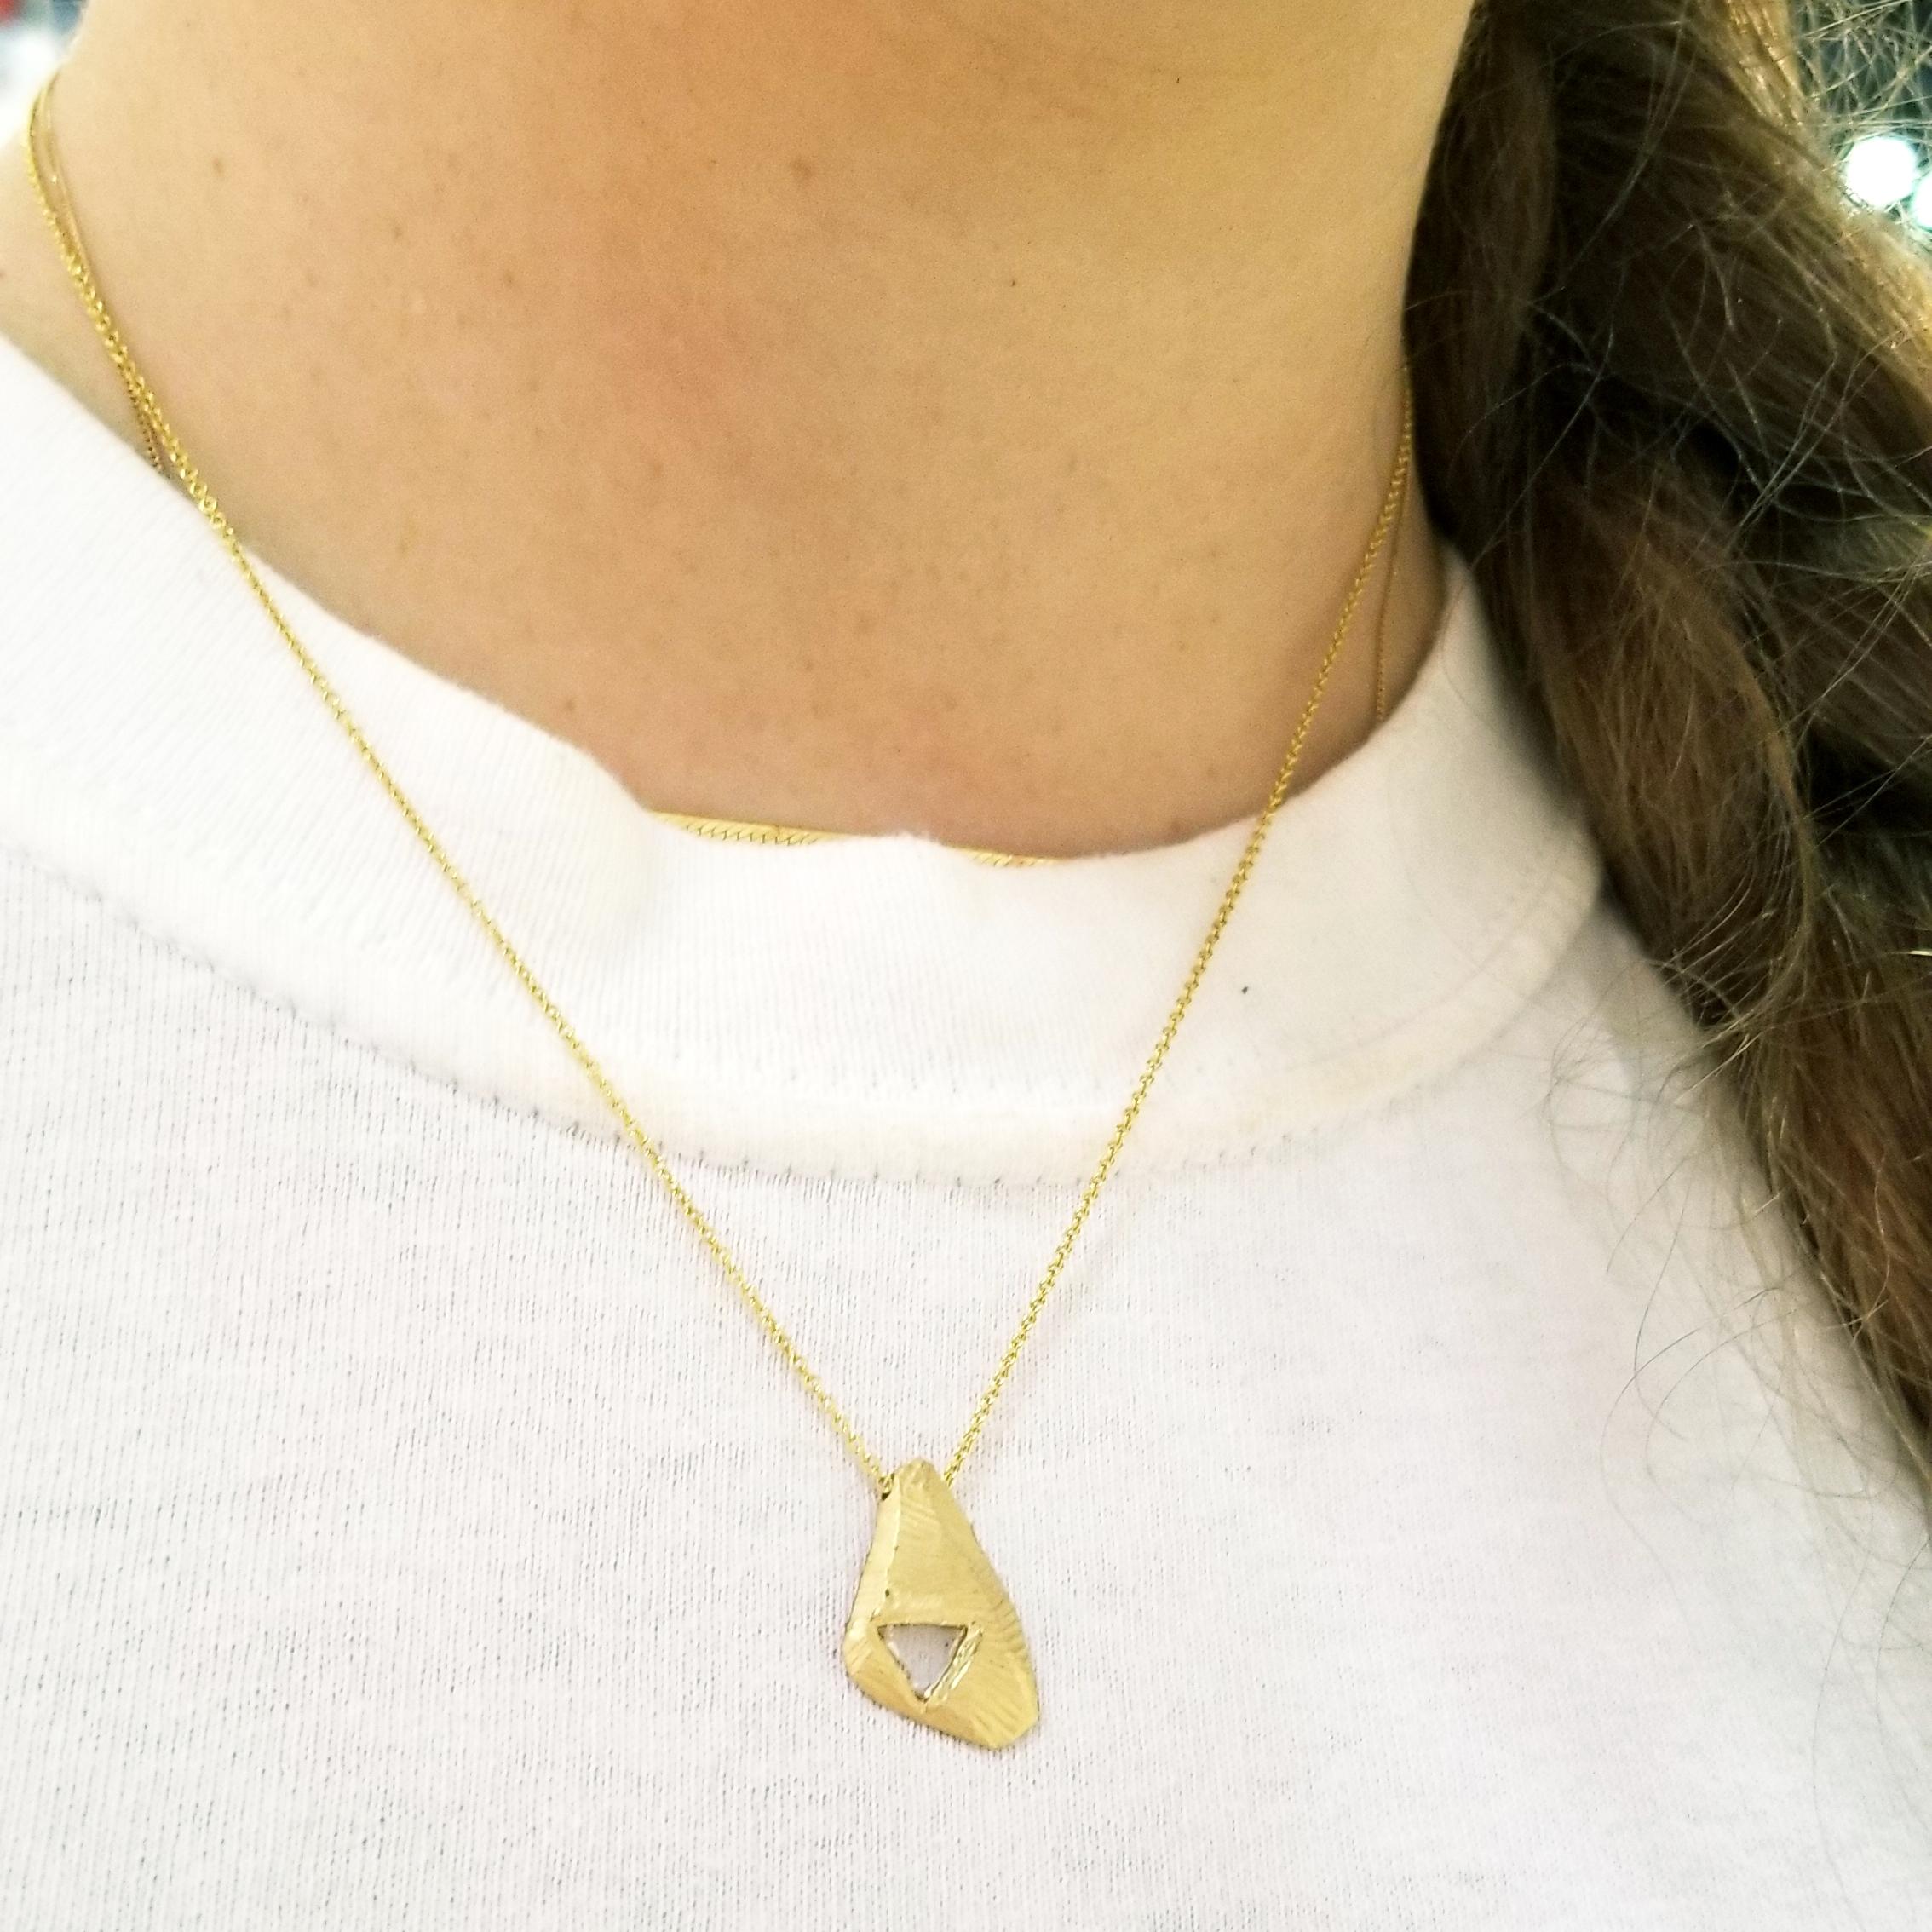 18KT One-of-a-kind diamond tab necklace handcarved necklace with triangle diamond slice tcw .14.  Handcarved by NYC artist Page Sargisson and cast with recycled gold.  Measures 16